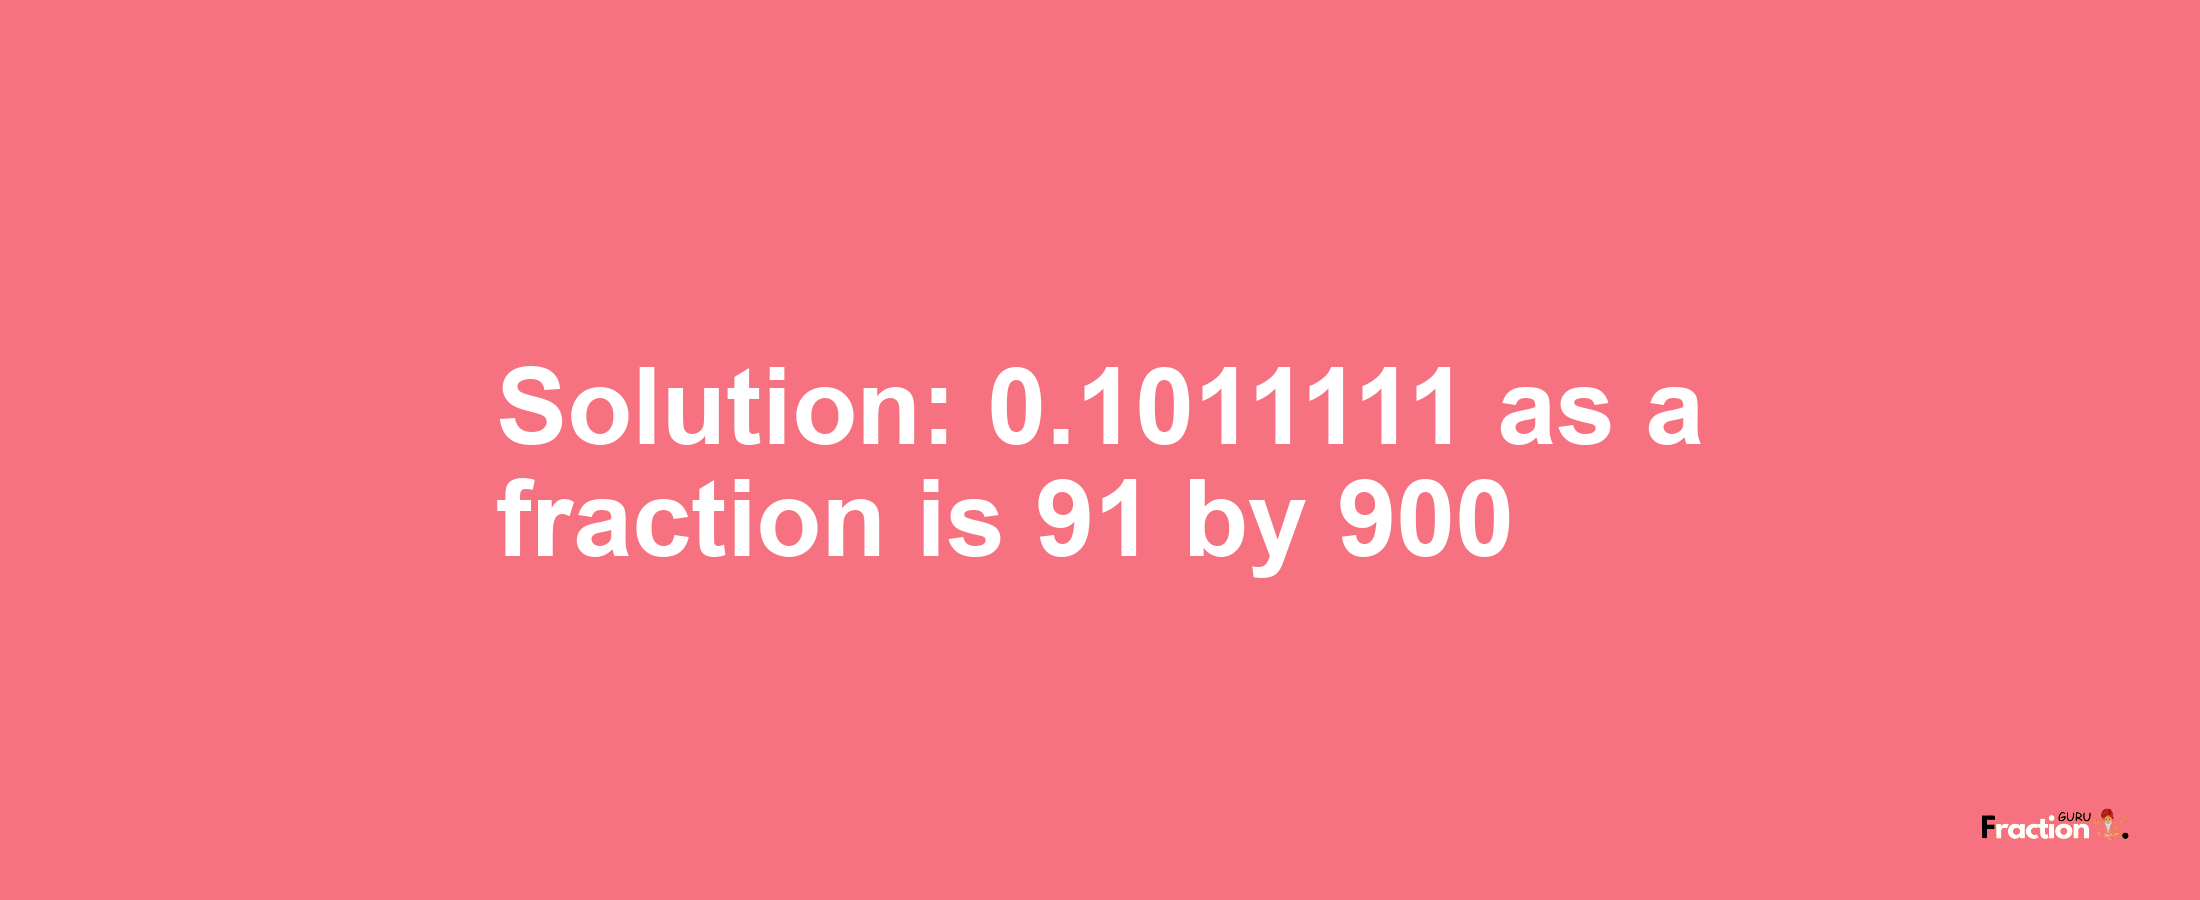 Solution:0.1011111 as a fraction is 91/900